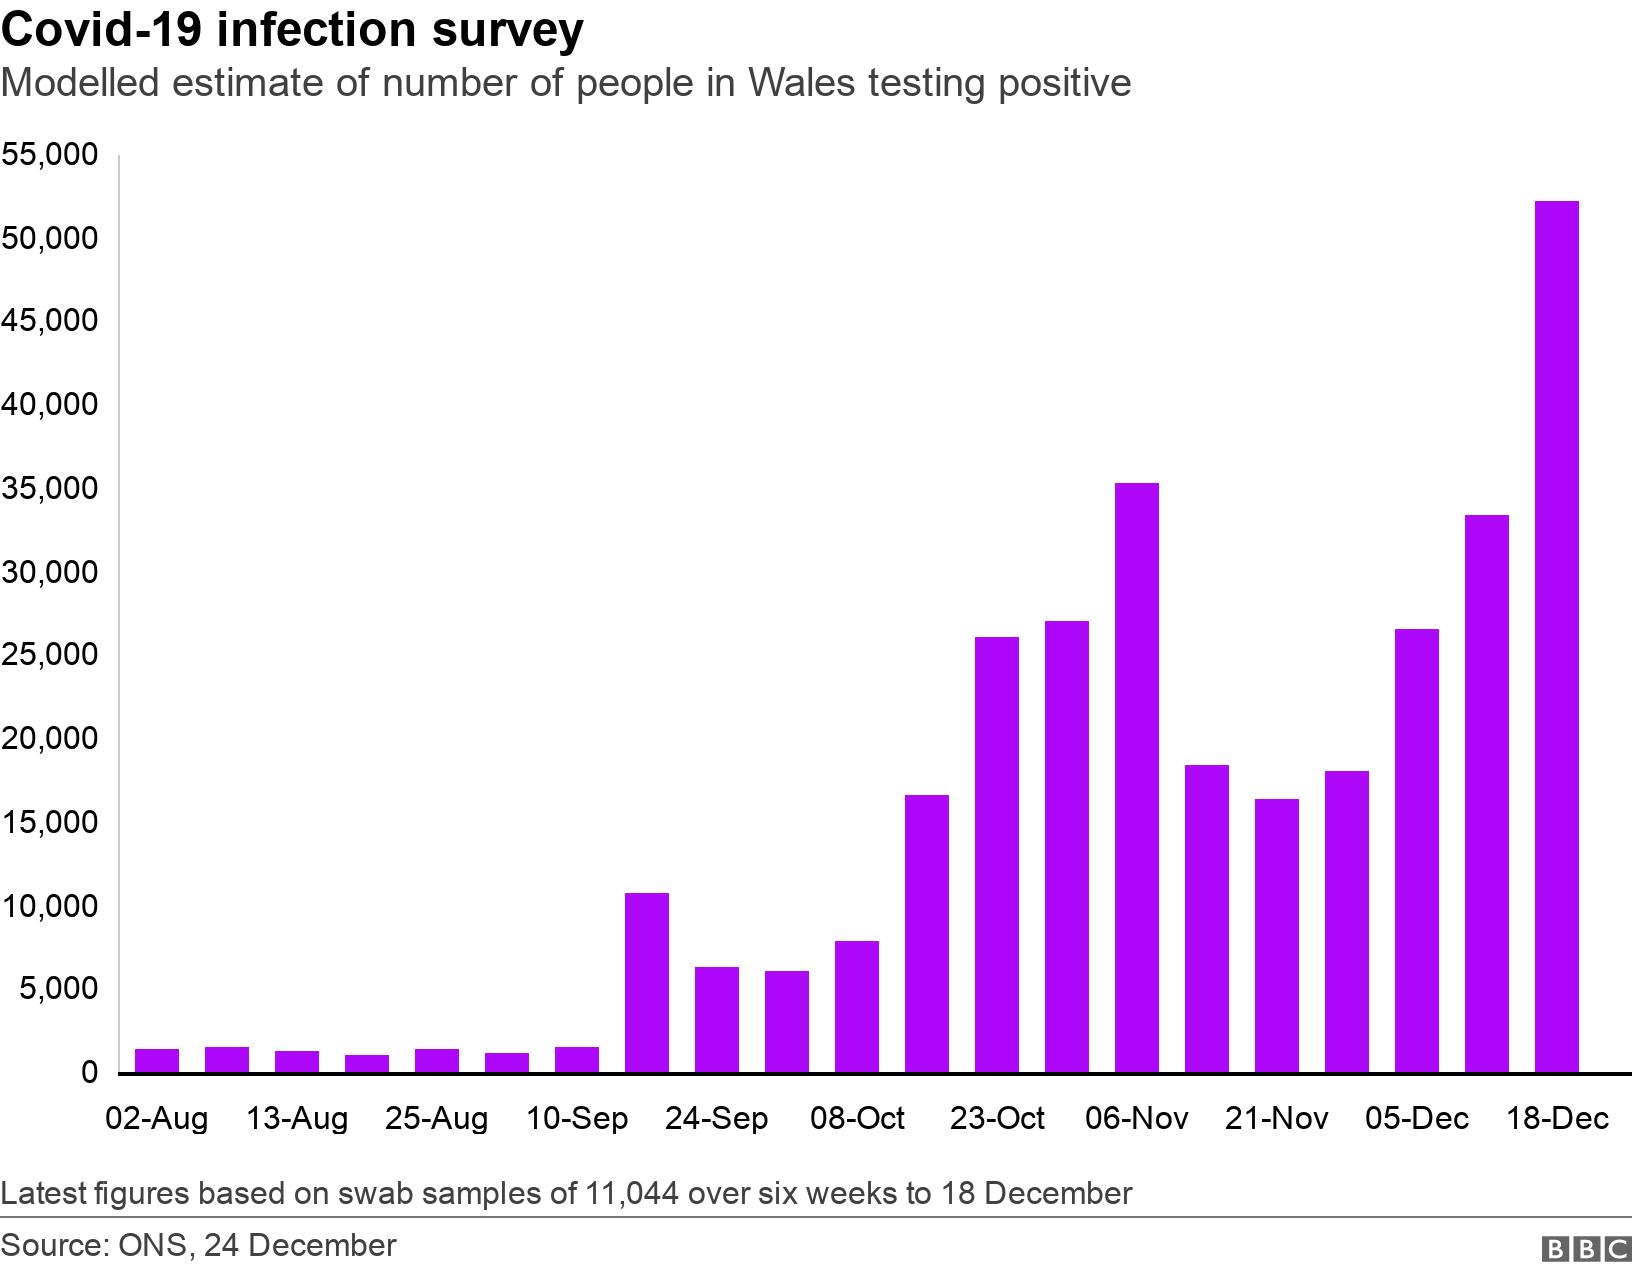 Covid-19 infection survey. Modelled estimate of number of people in Wales testing positive. Latest figures based on swab samples of 11,044 over six weeks to 18 December.